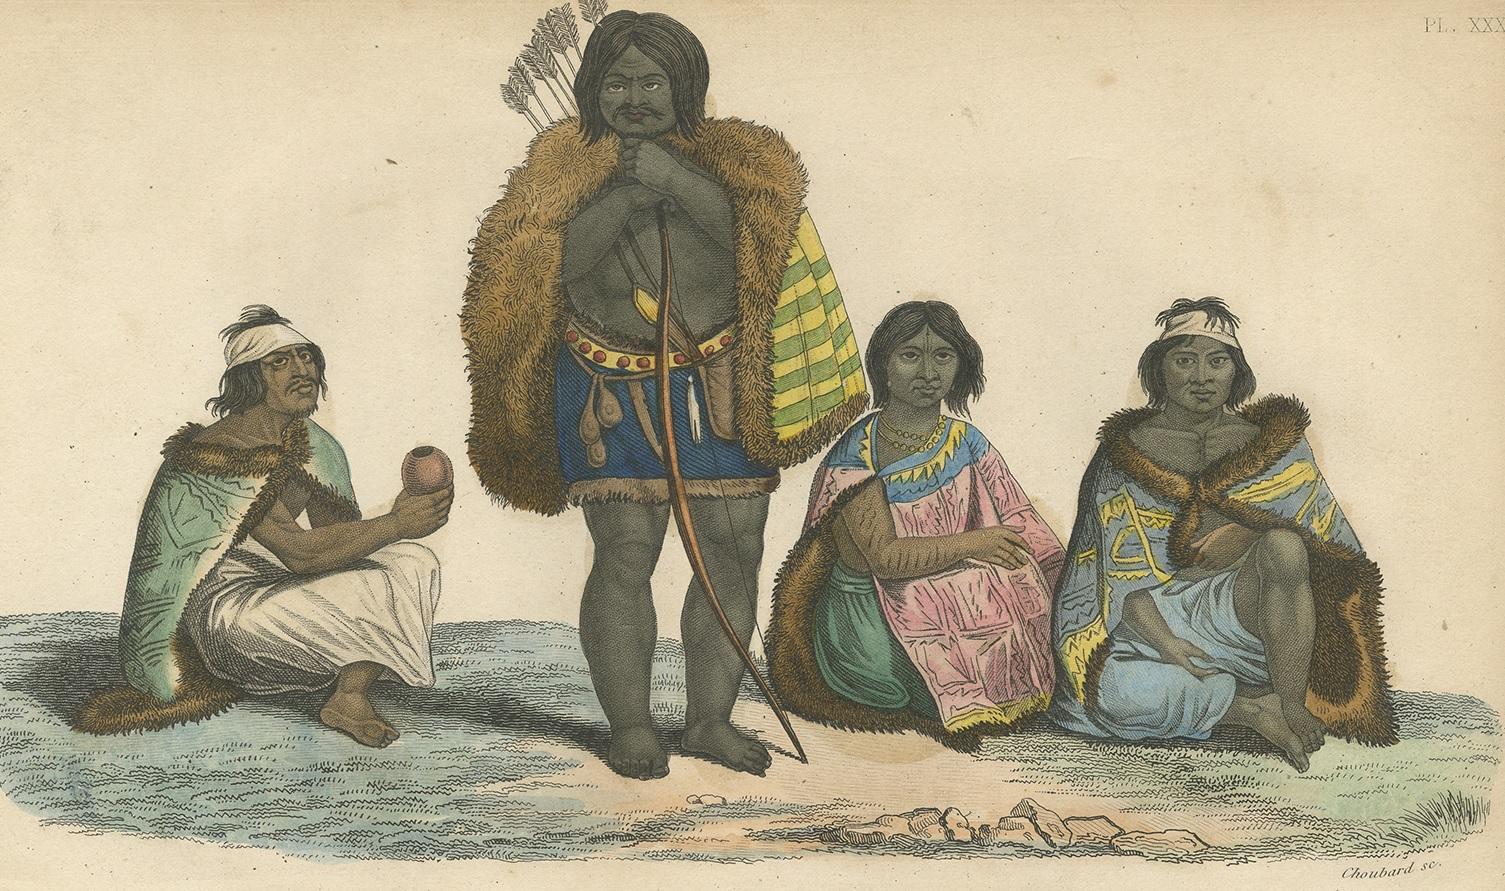 Antique print titled 'Charruas vus à Paris'. Lithograph of Charrúa, an Amerindian, Indigenous People or Indigenous Nation of the Southern Cone in present-day Uruguay and the adjacent areas in Argentina (Entre Ríos) and Brazil (Rio Grande do Sul).